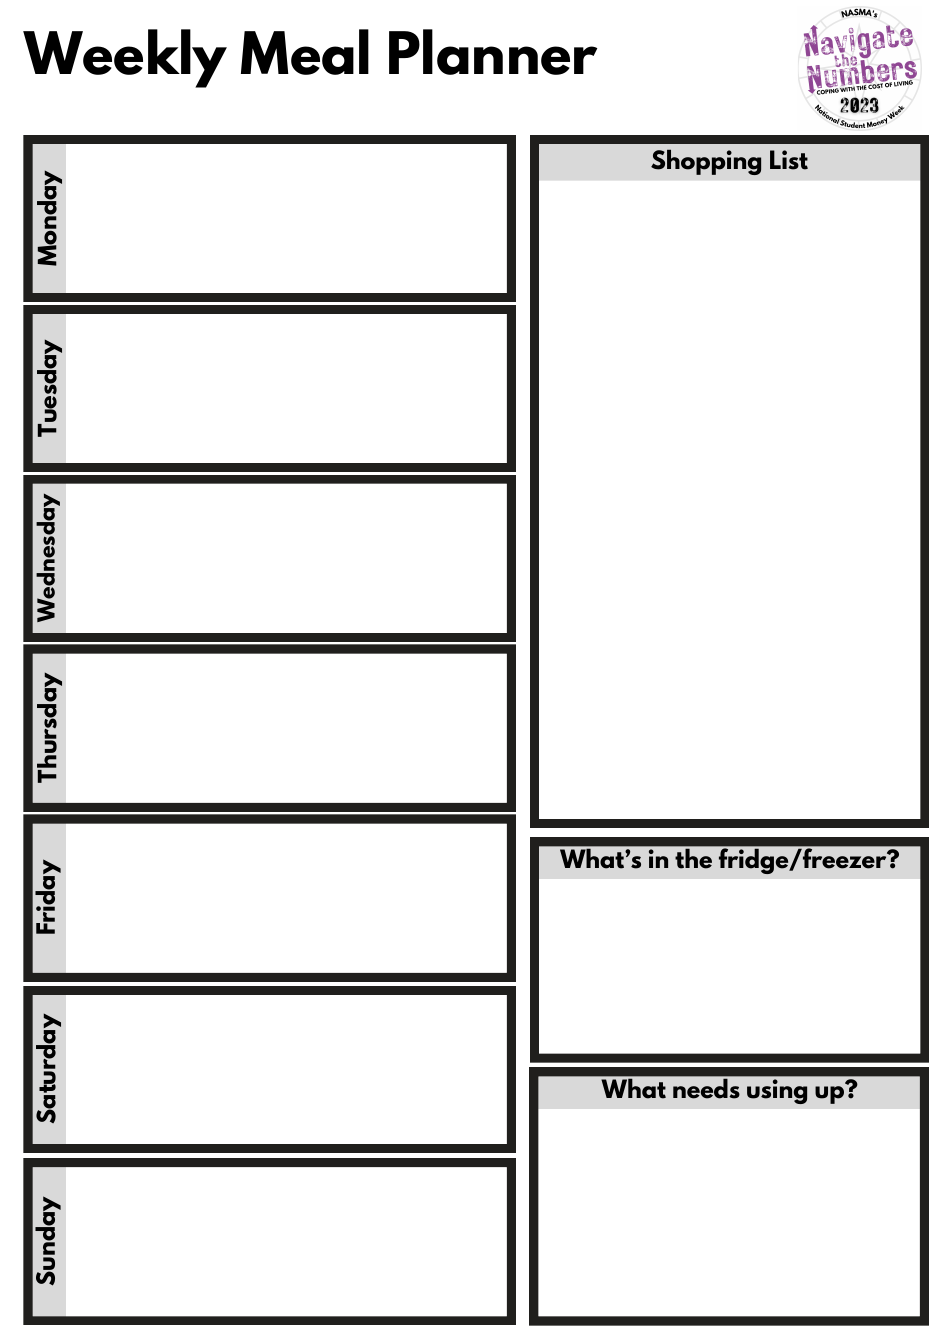 Weekly Meal Planner and Shopping List Template - Navigate the Numbers, Page 1